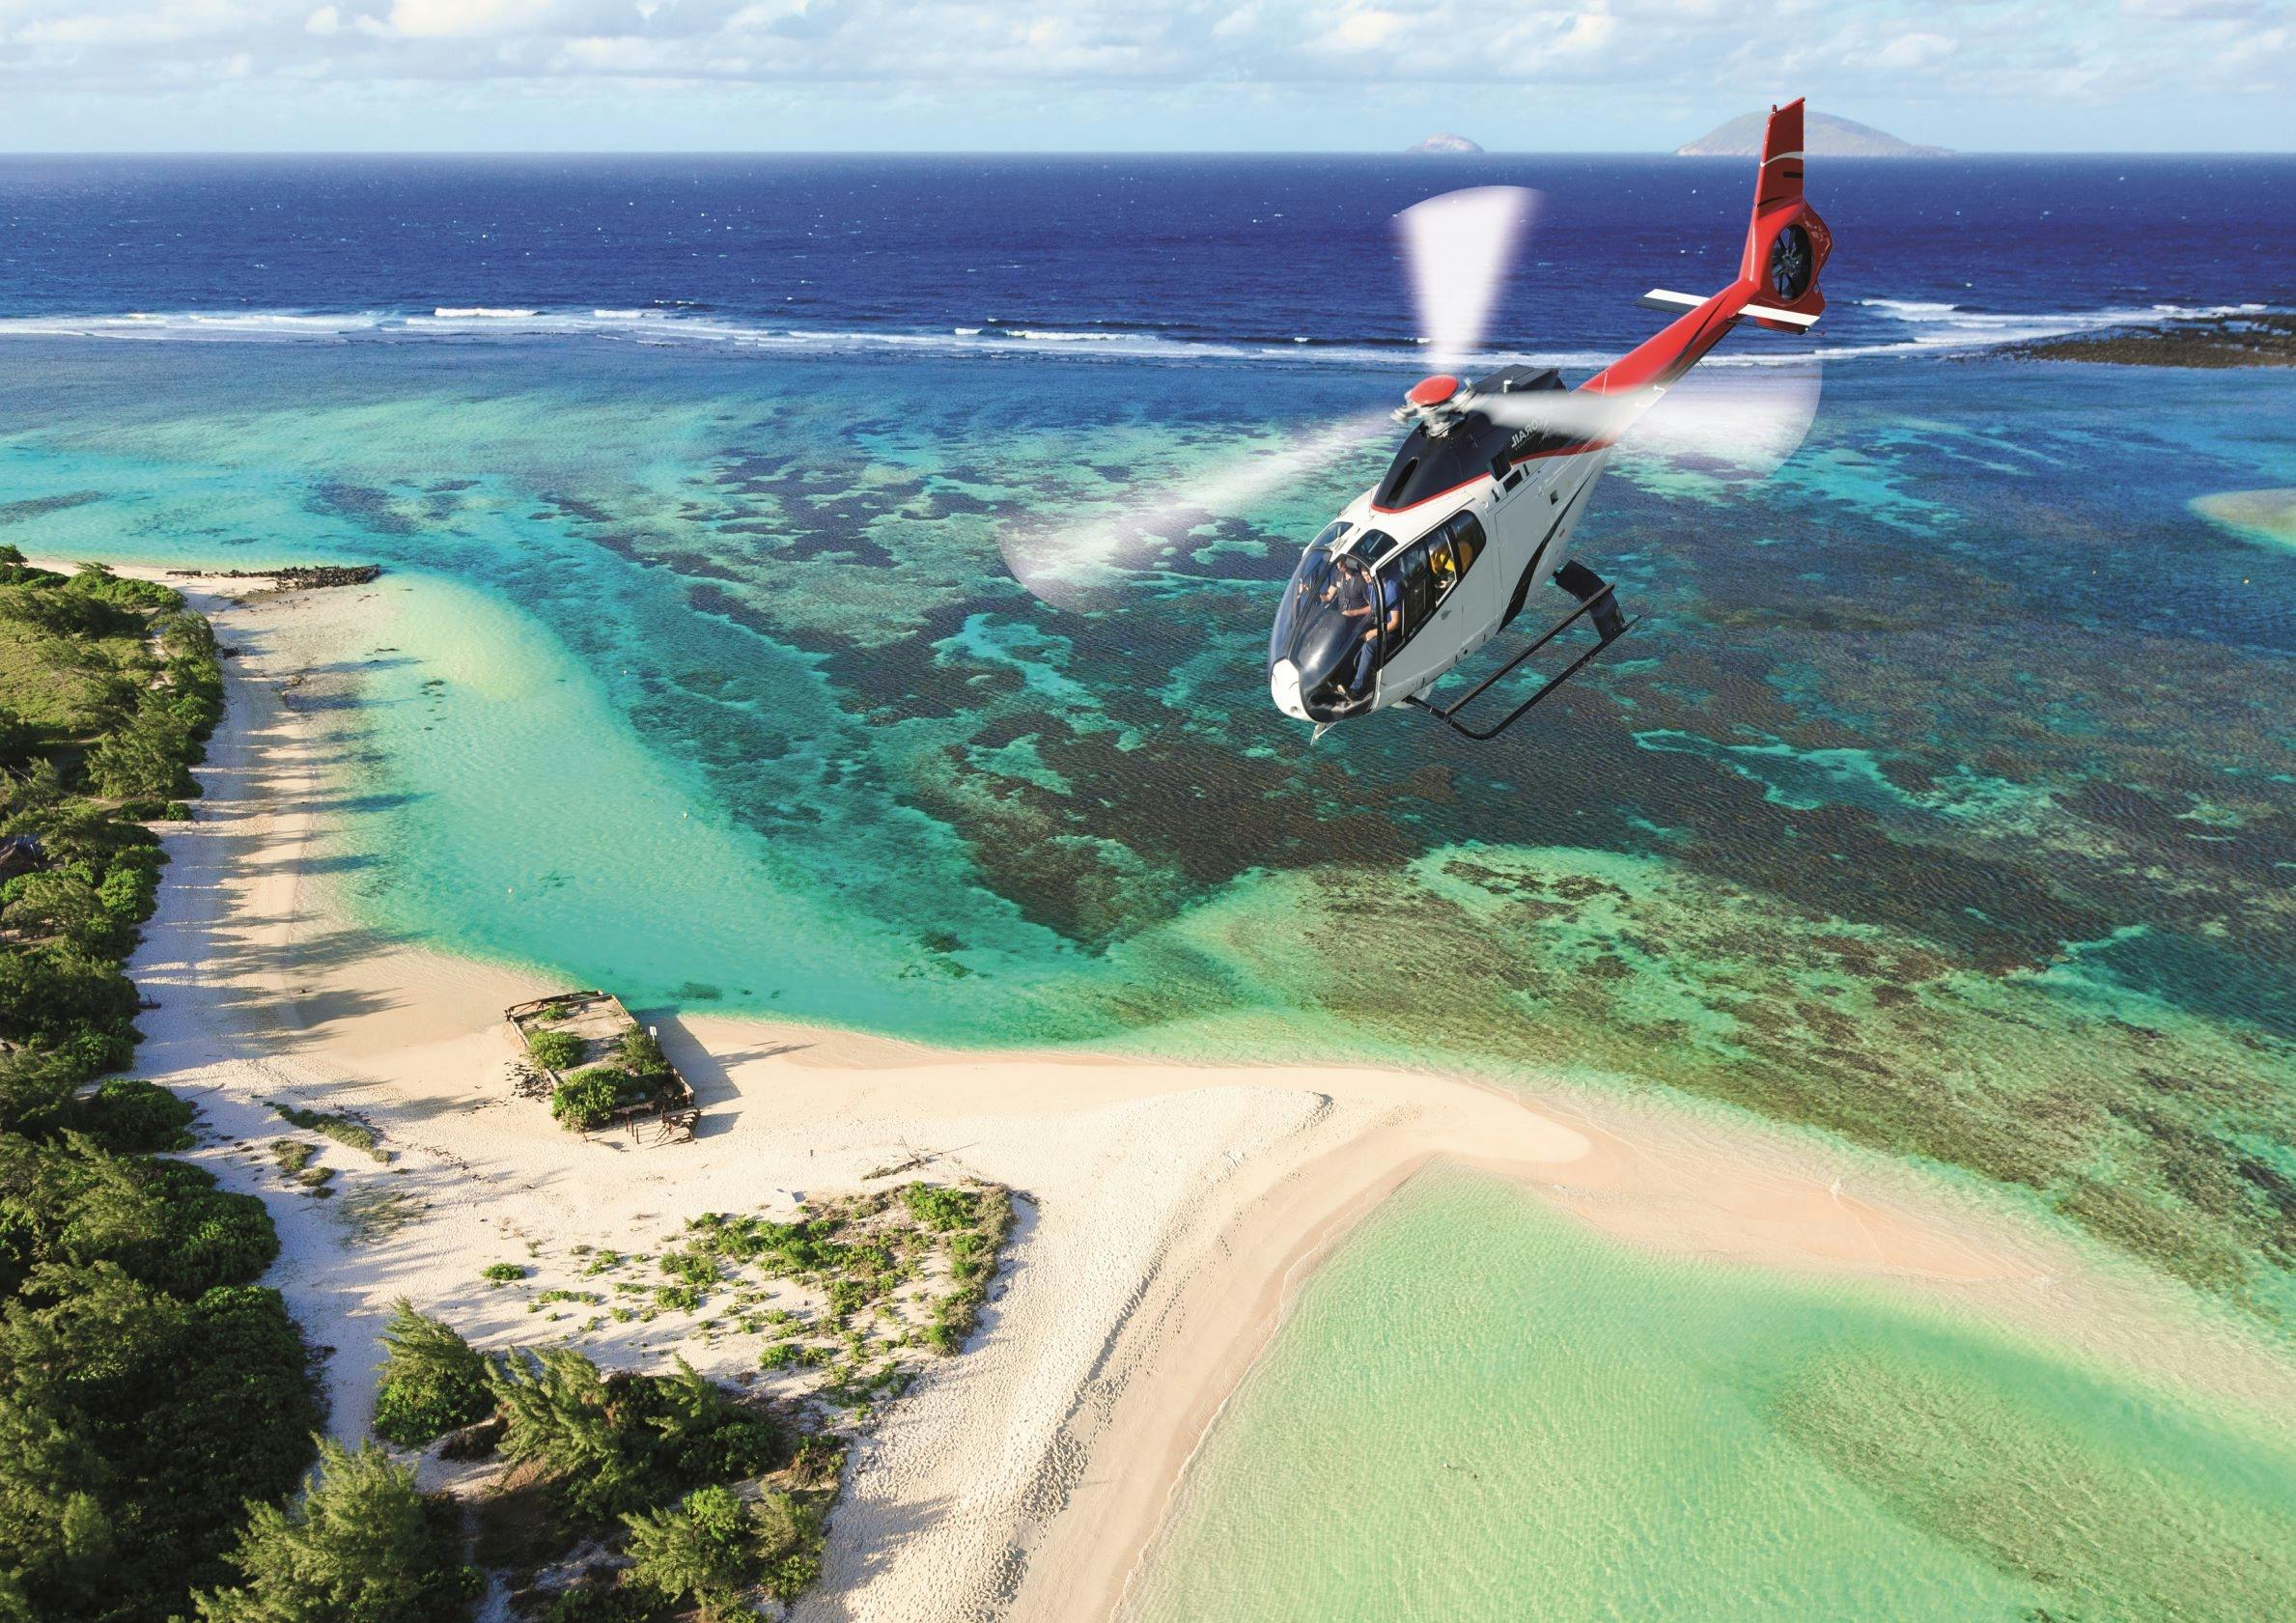 Mauritius 10-minute helicopter flight over the Grand Bay area